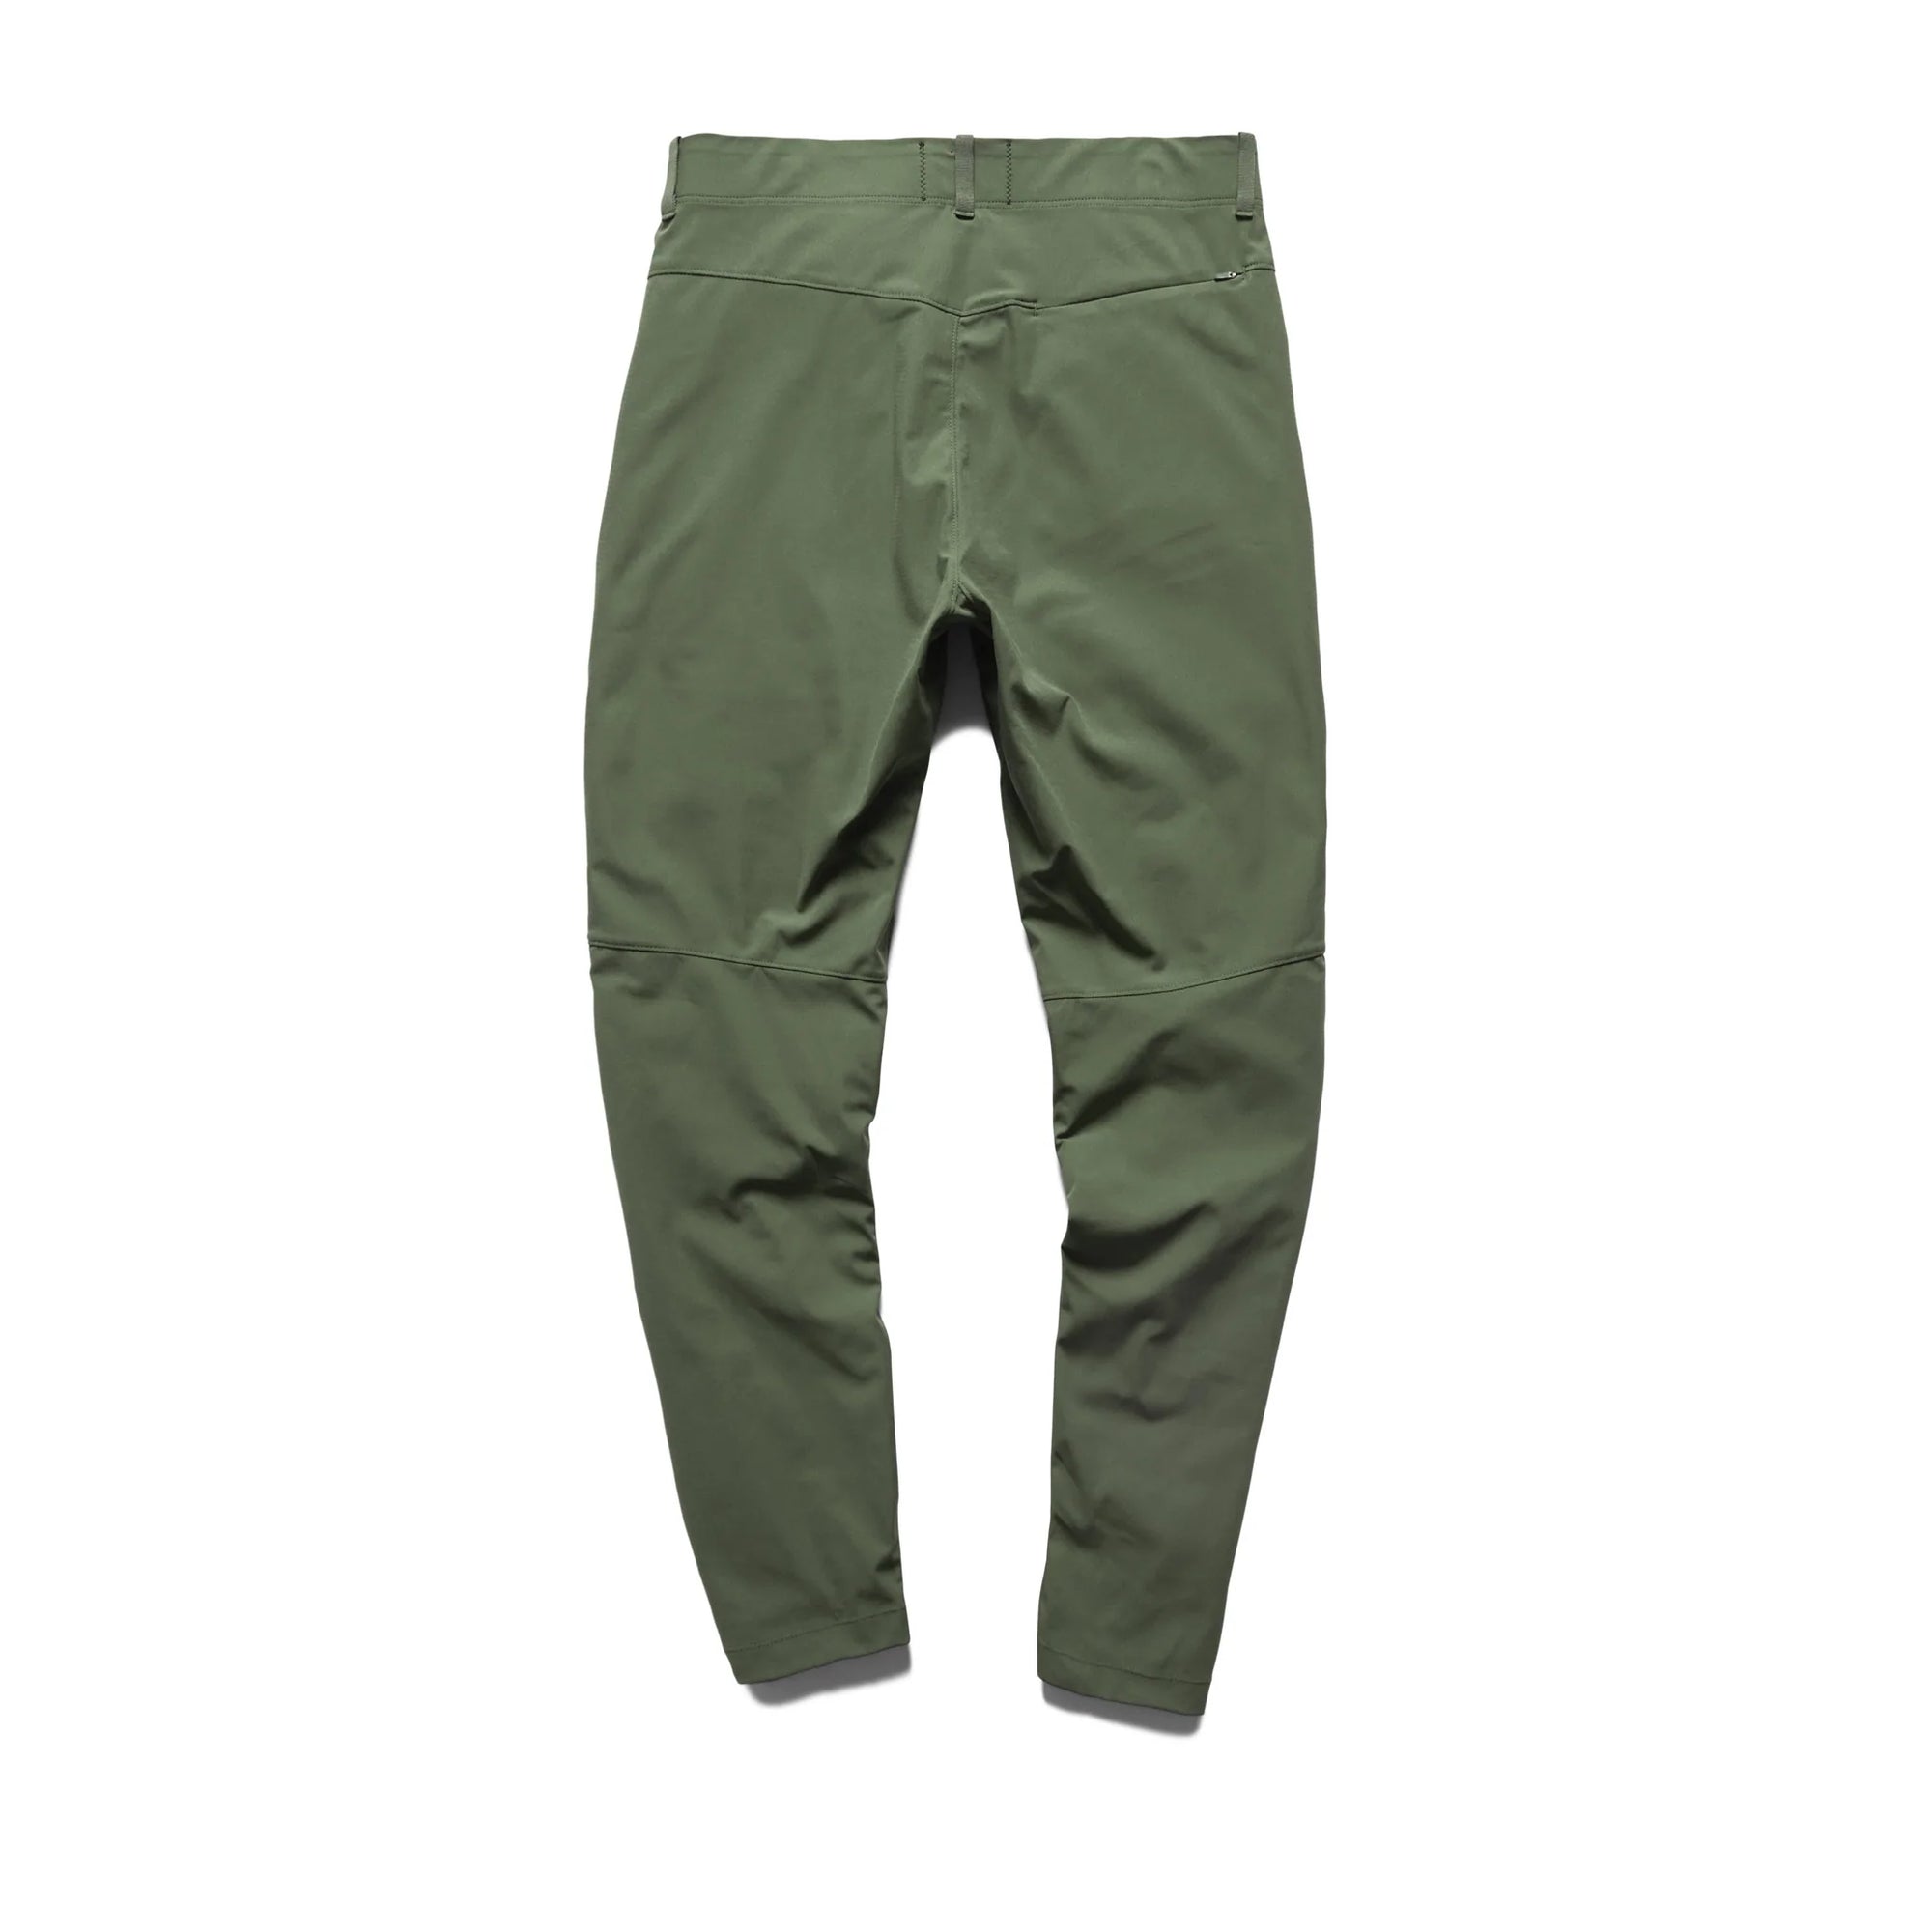 Reigning Champ Coach's Pant in Ivy